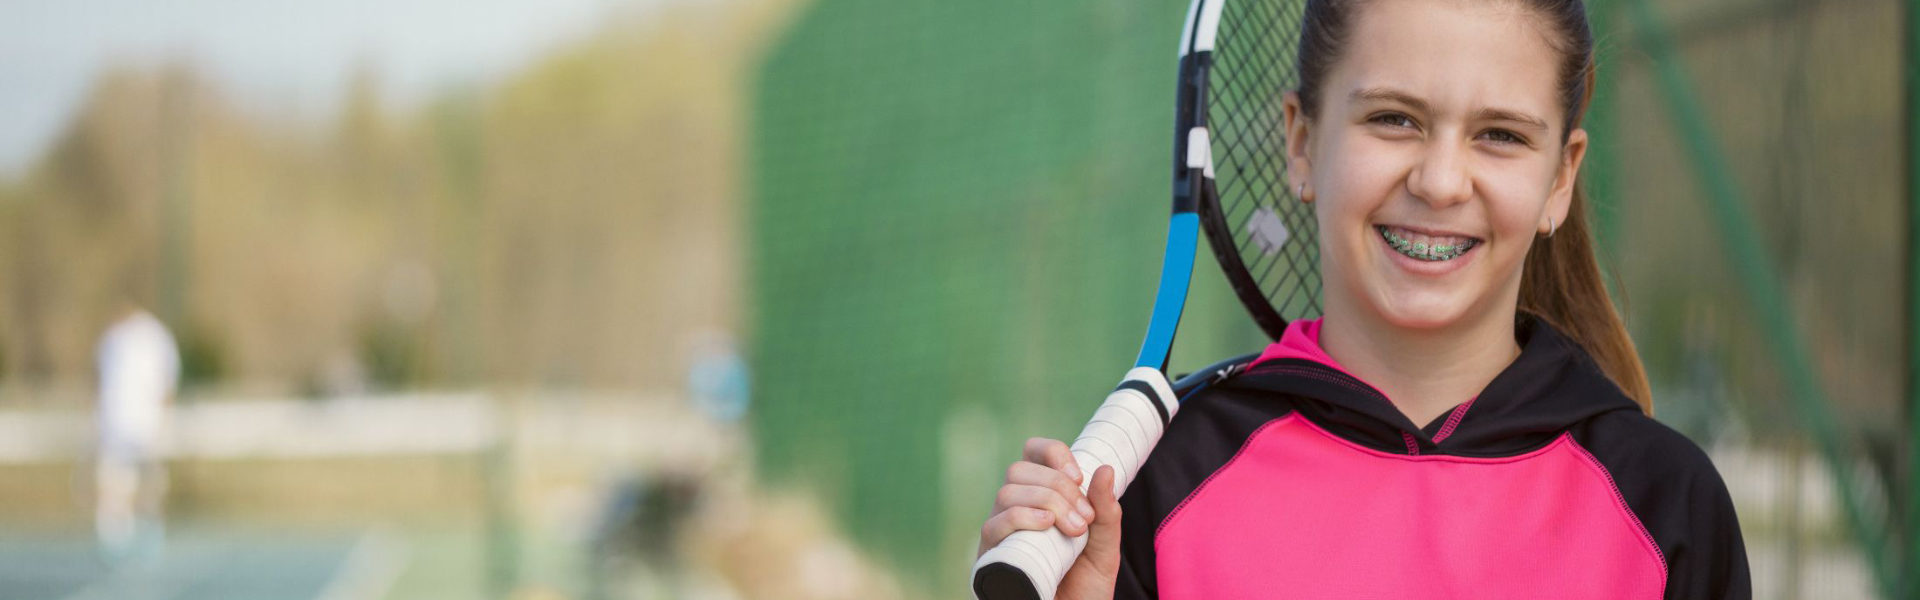 5 Tips for Protecting Braces While Playing Sports